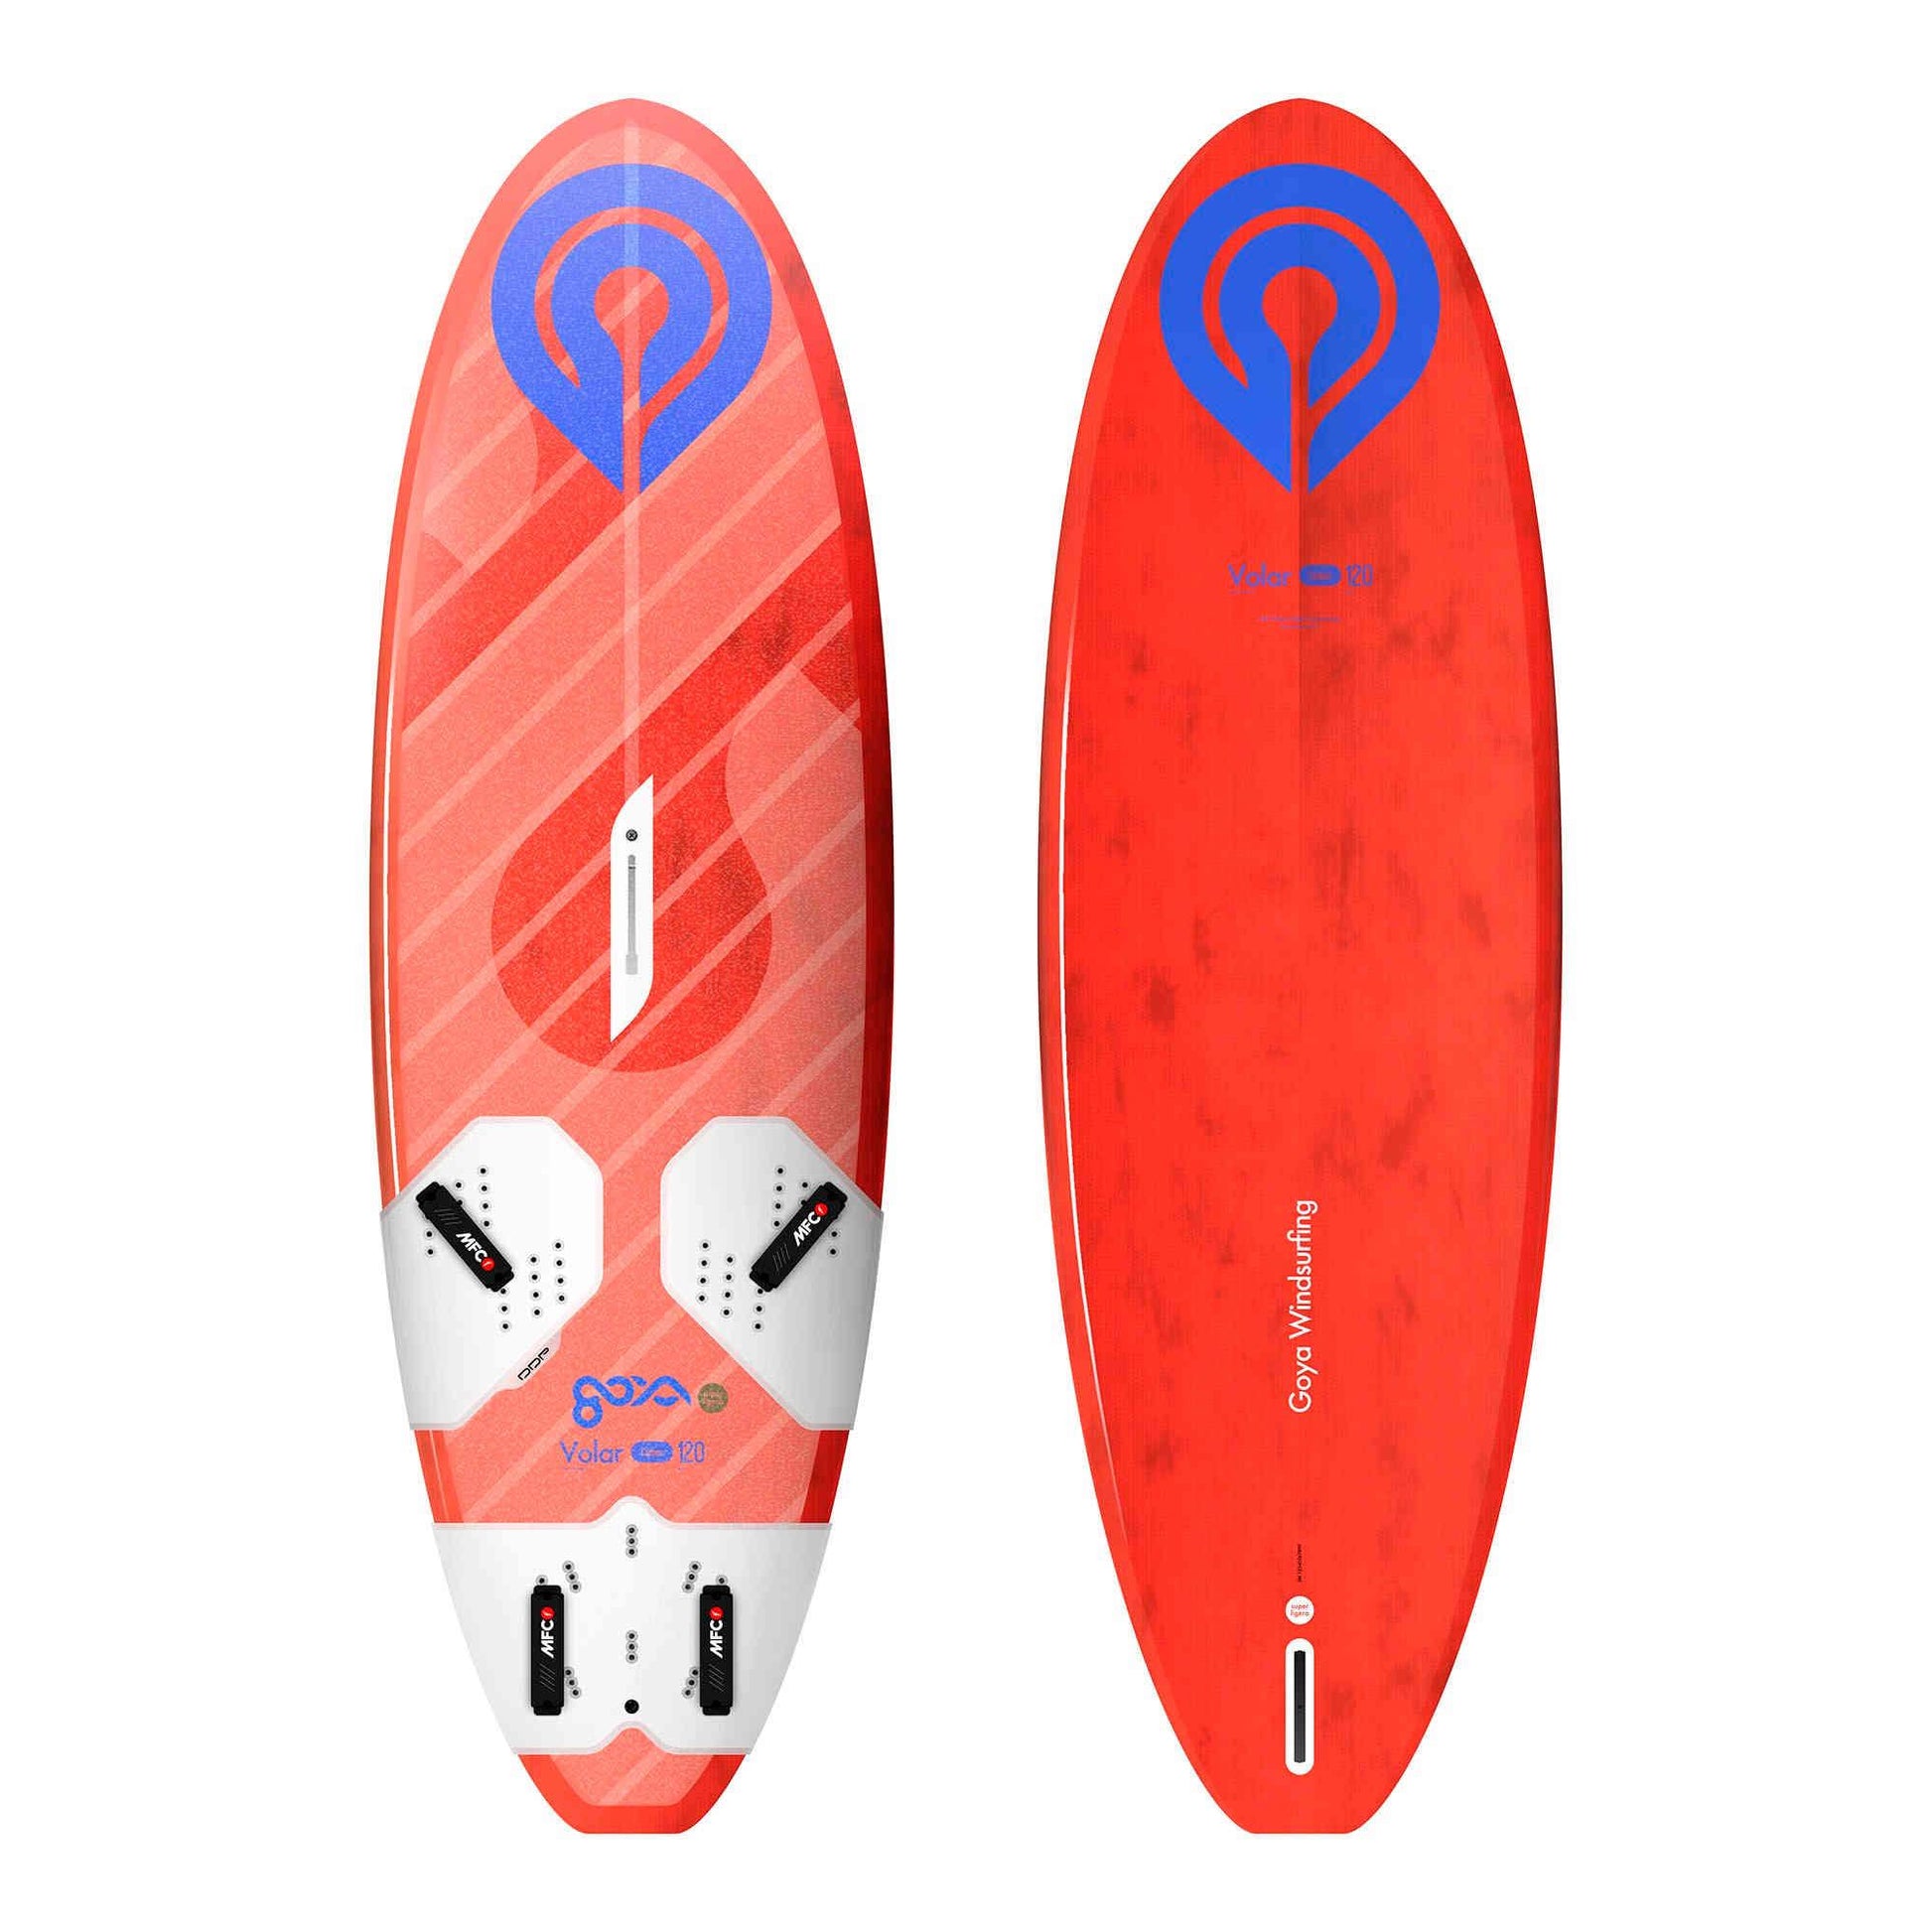 Goya Volar Carbon Board - Poole Harbour Watersports